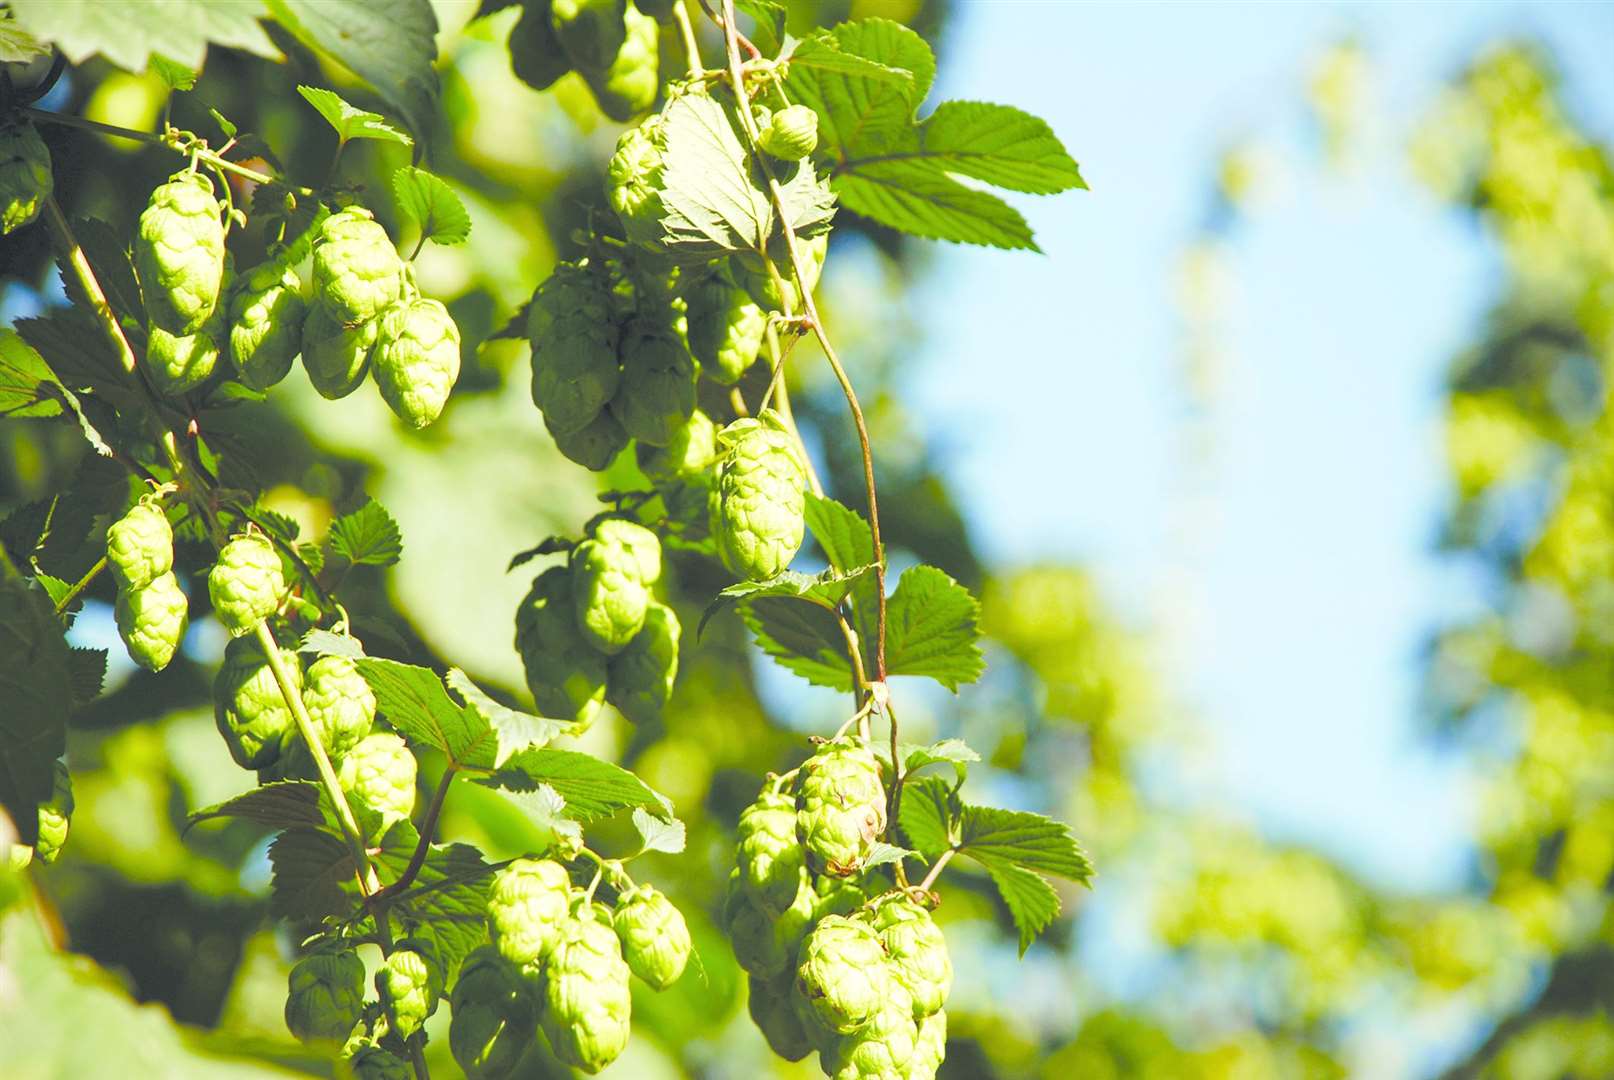 Hops provide the traditional aroma and flavour of beer